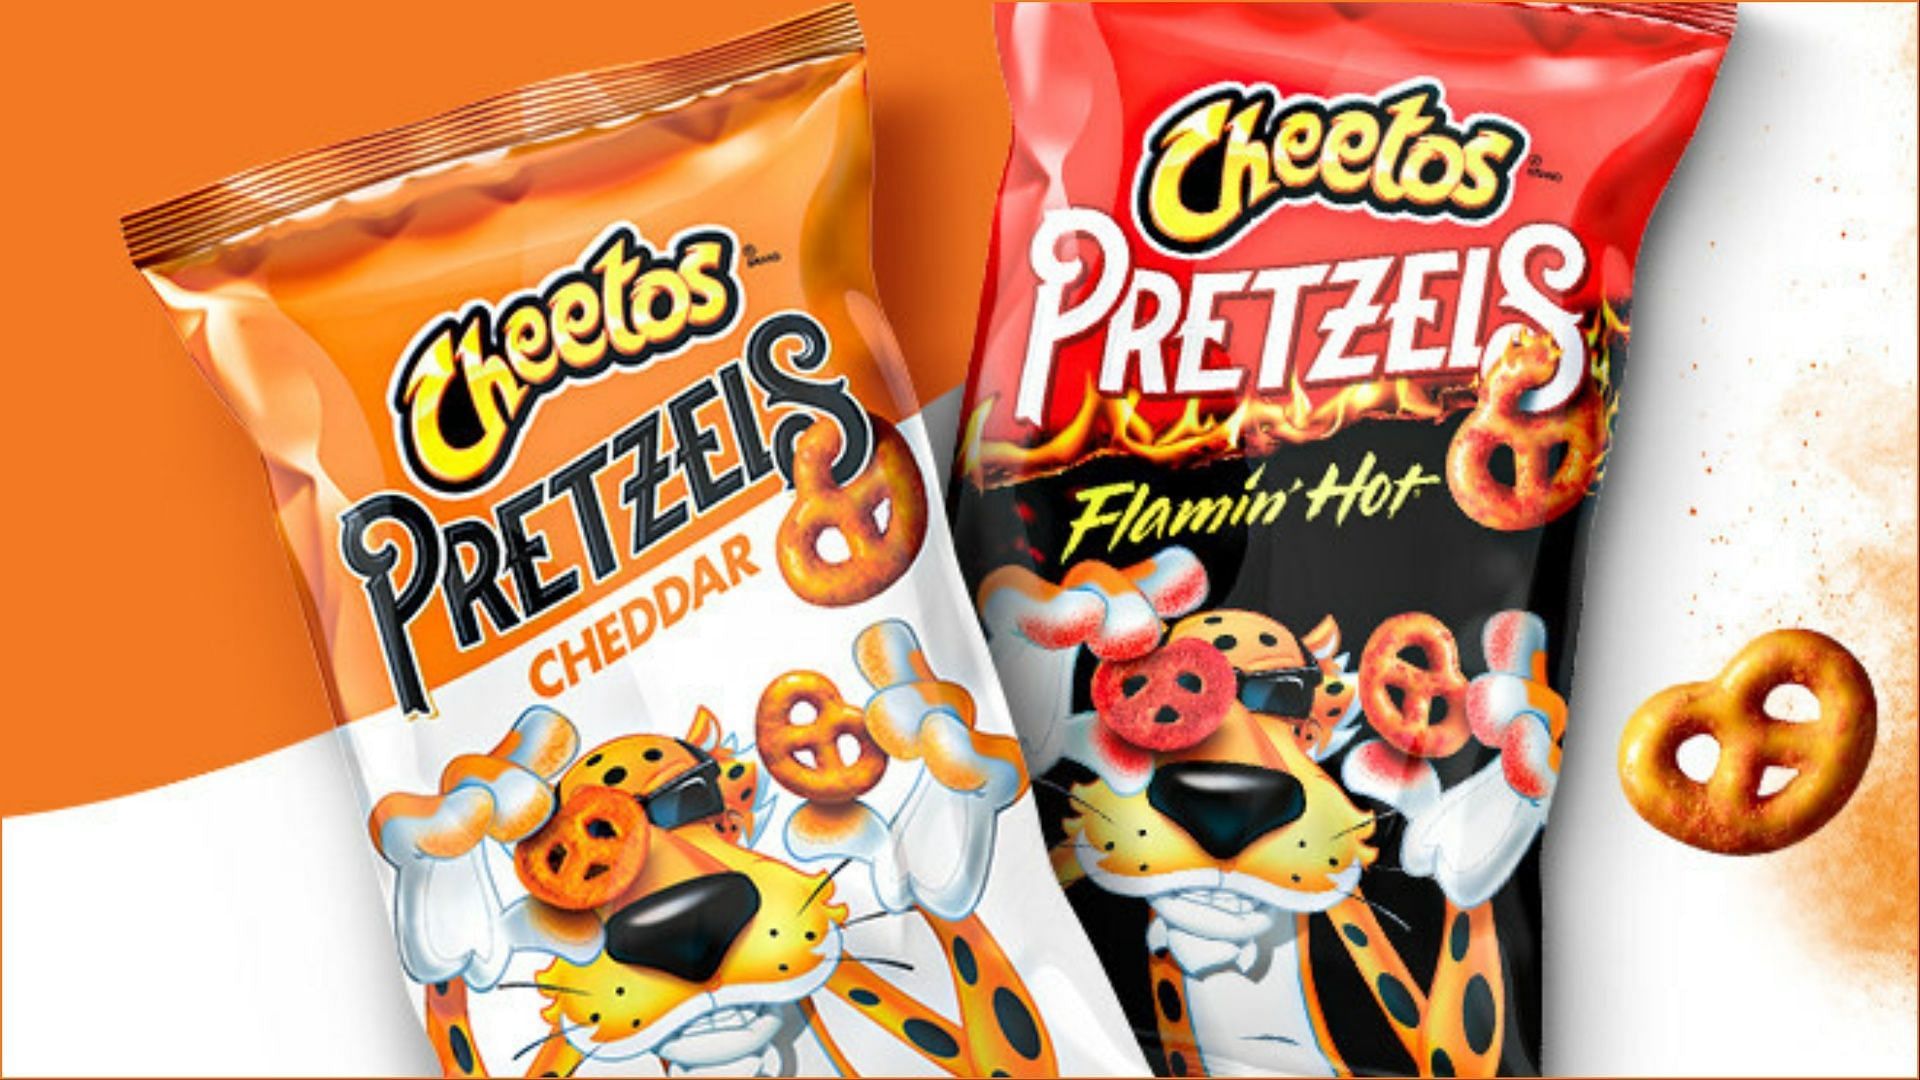 The new Cheetos Pretzels come in both 3-ounce and 10-ounce bags (Image via Cheetos)